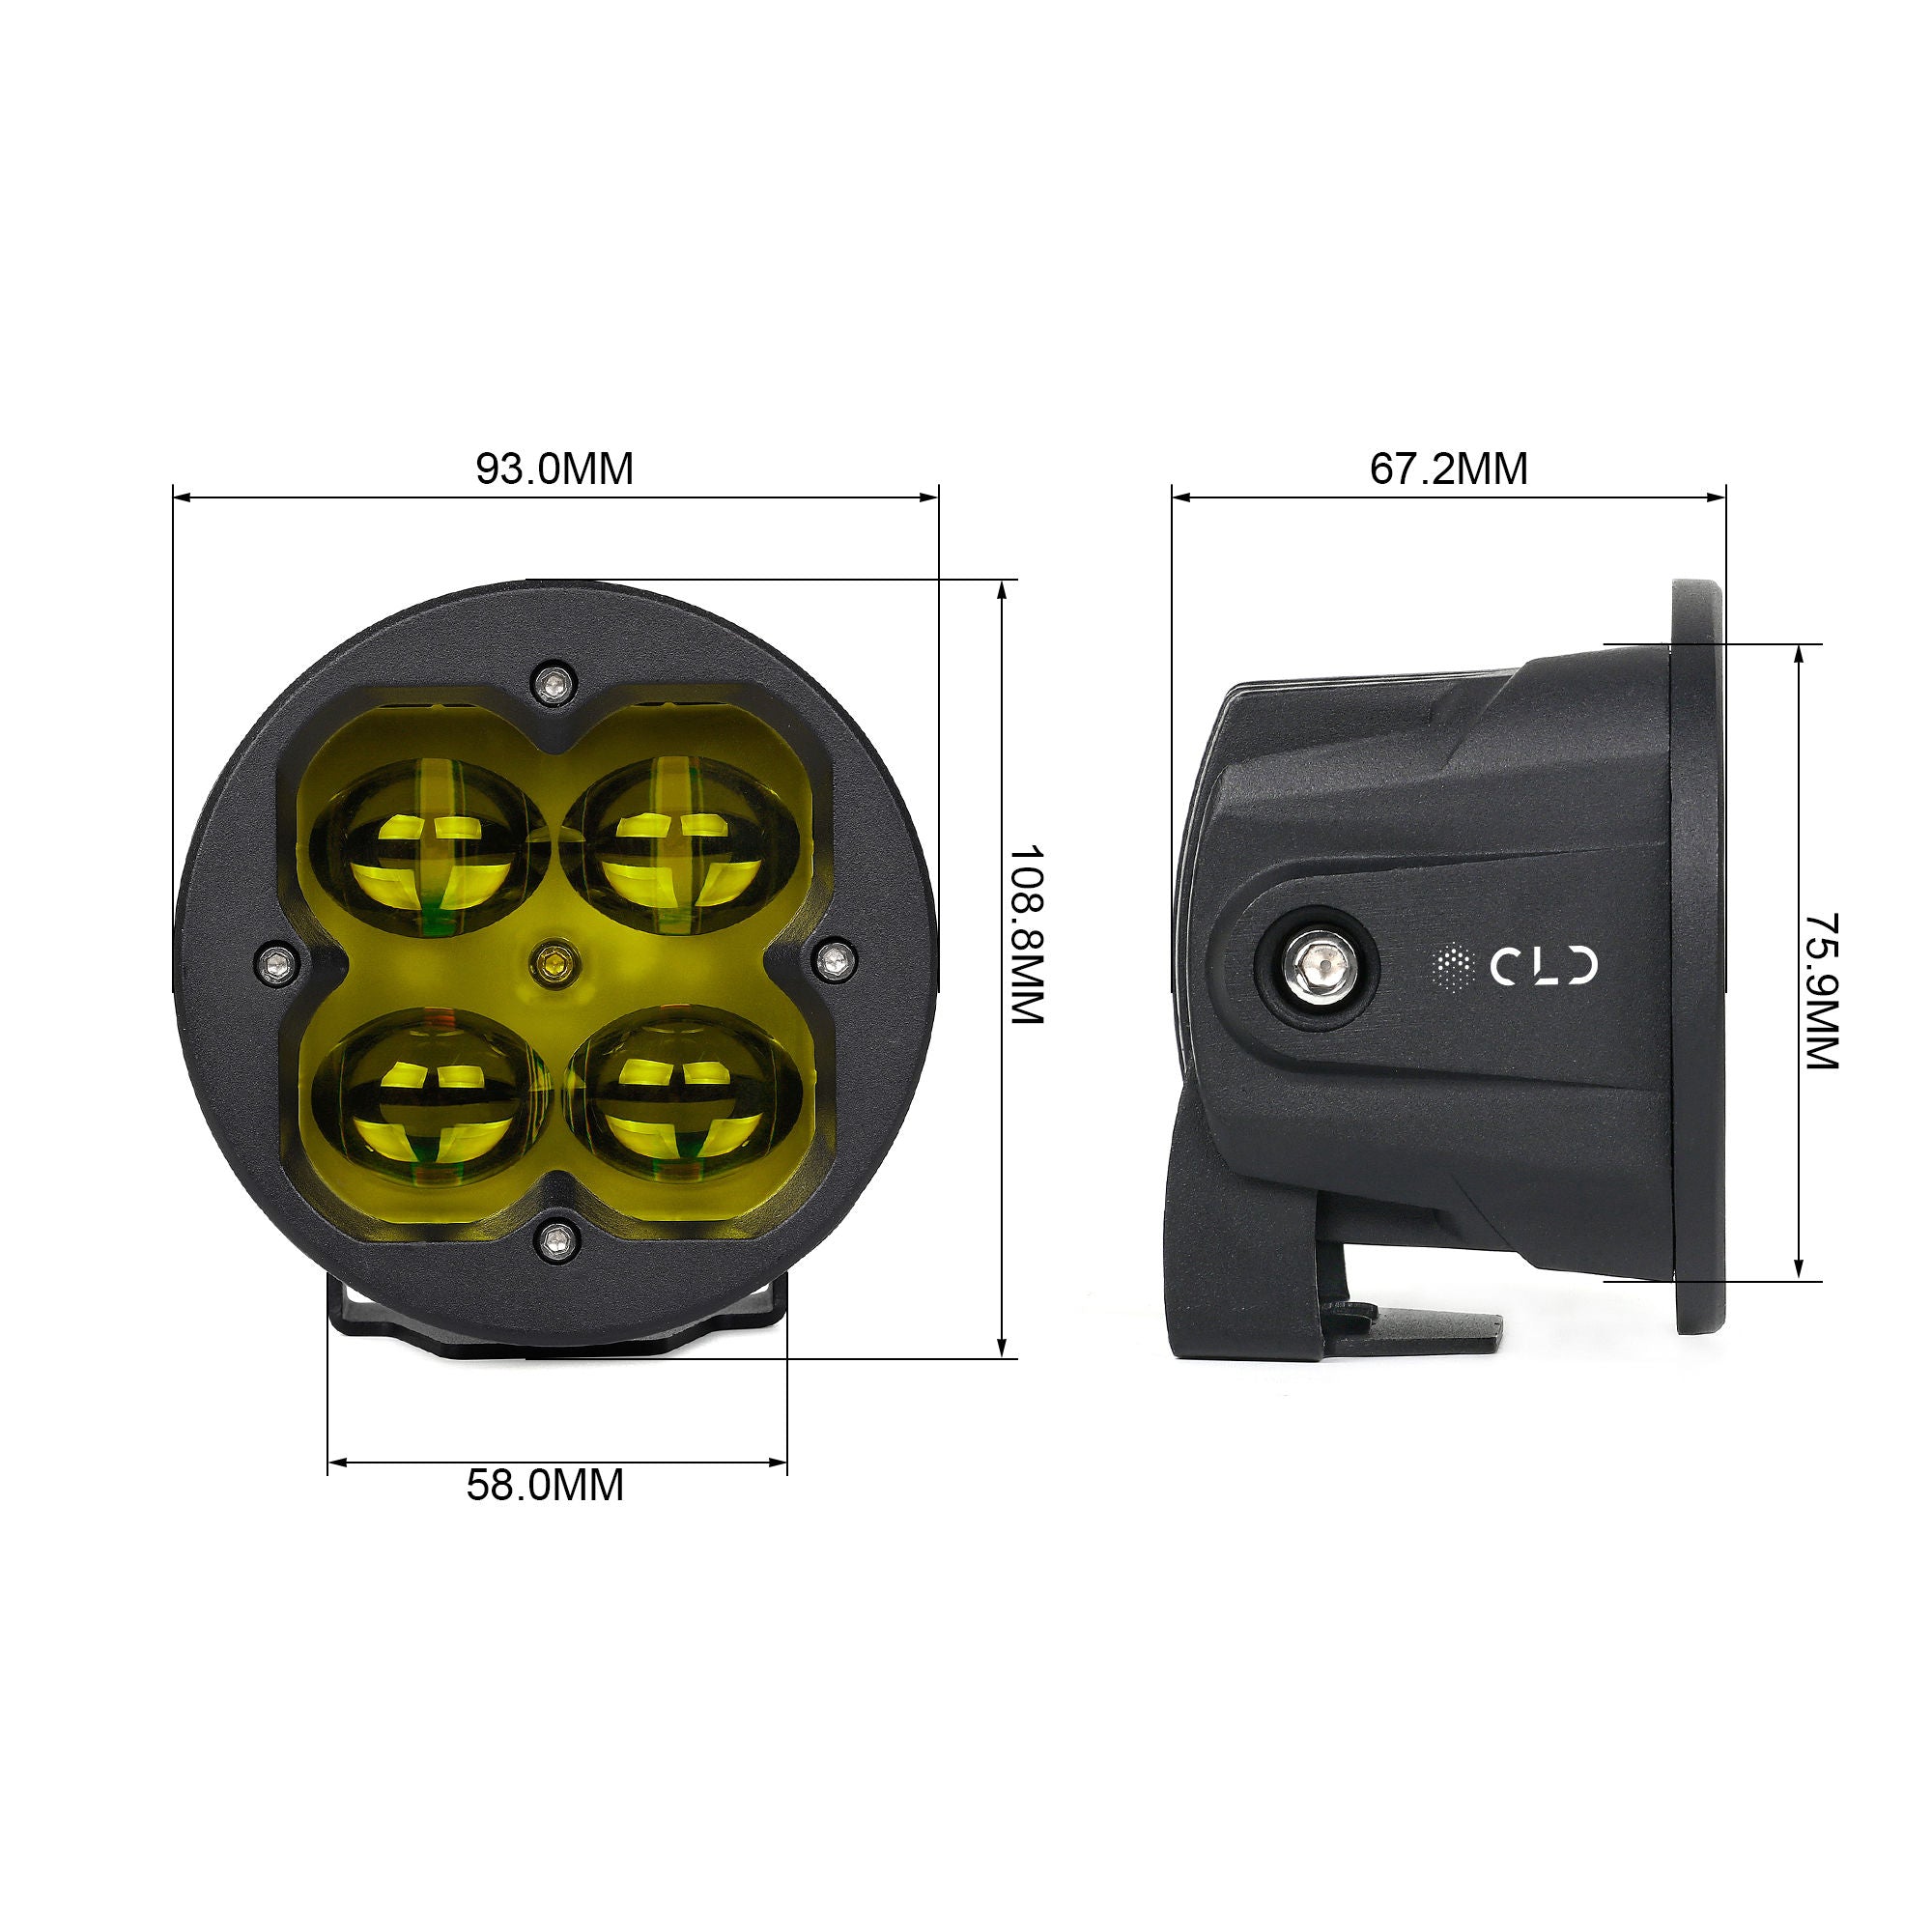 CLD CLDPRFGY - 3" Street Legal LED Pod Light - Auxiliary Round Fog Light w/Yellow Lens (620 Lumens)